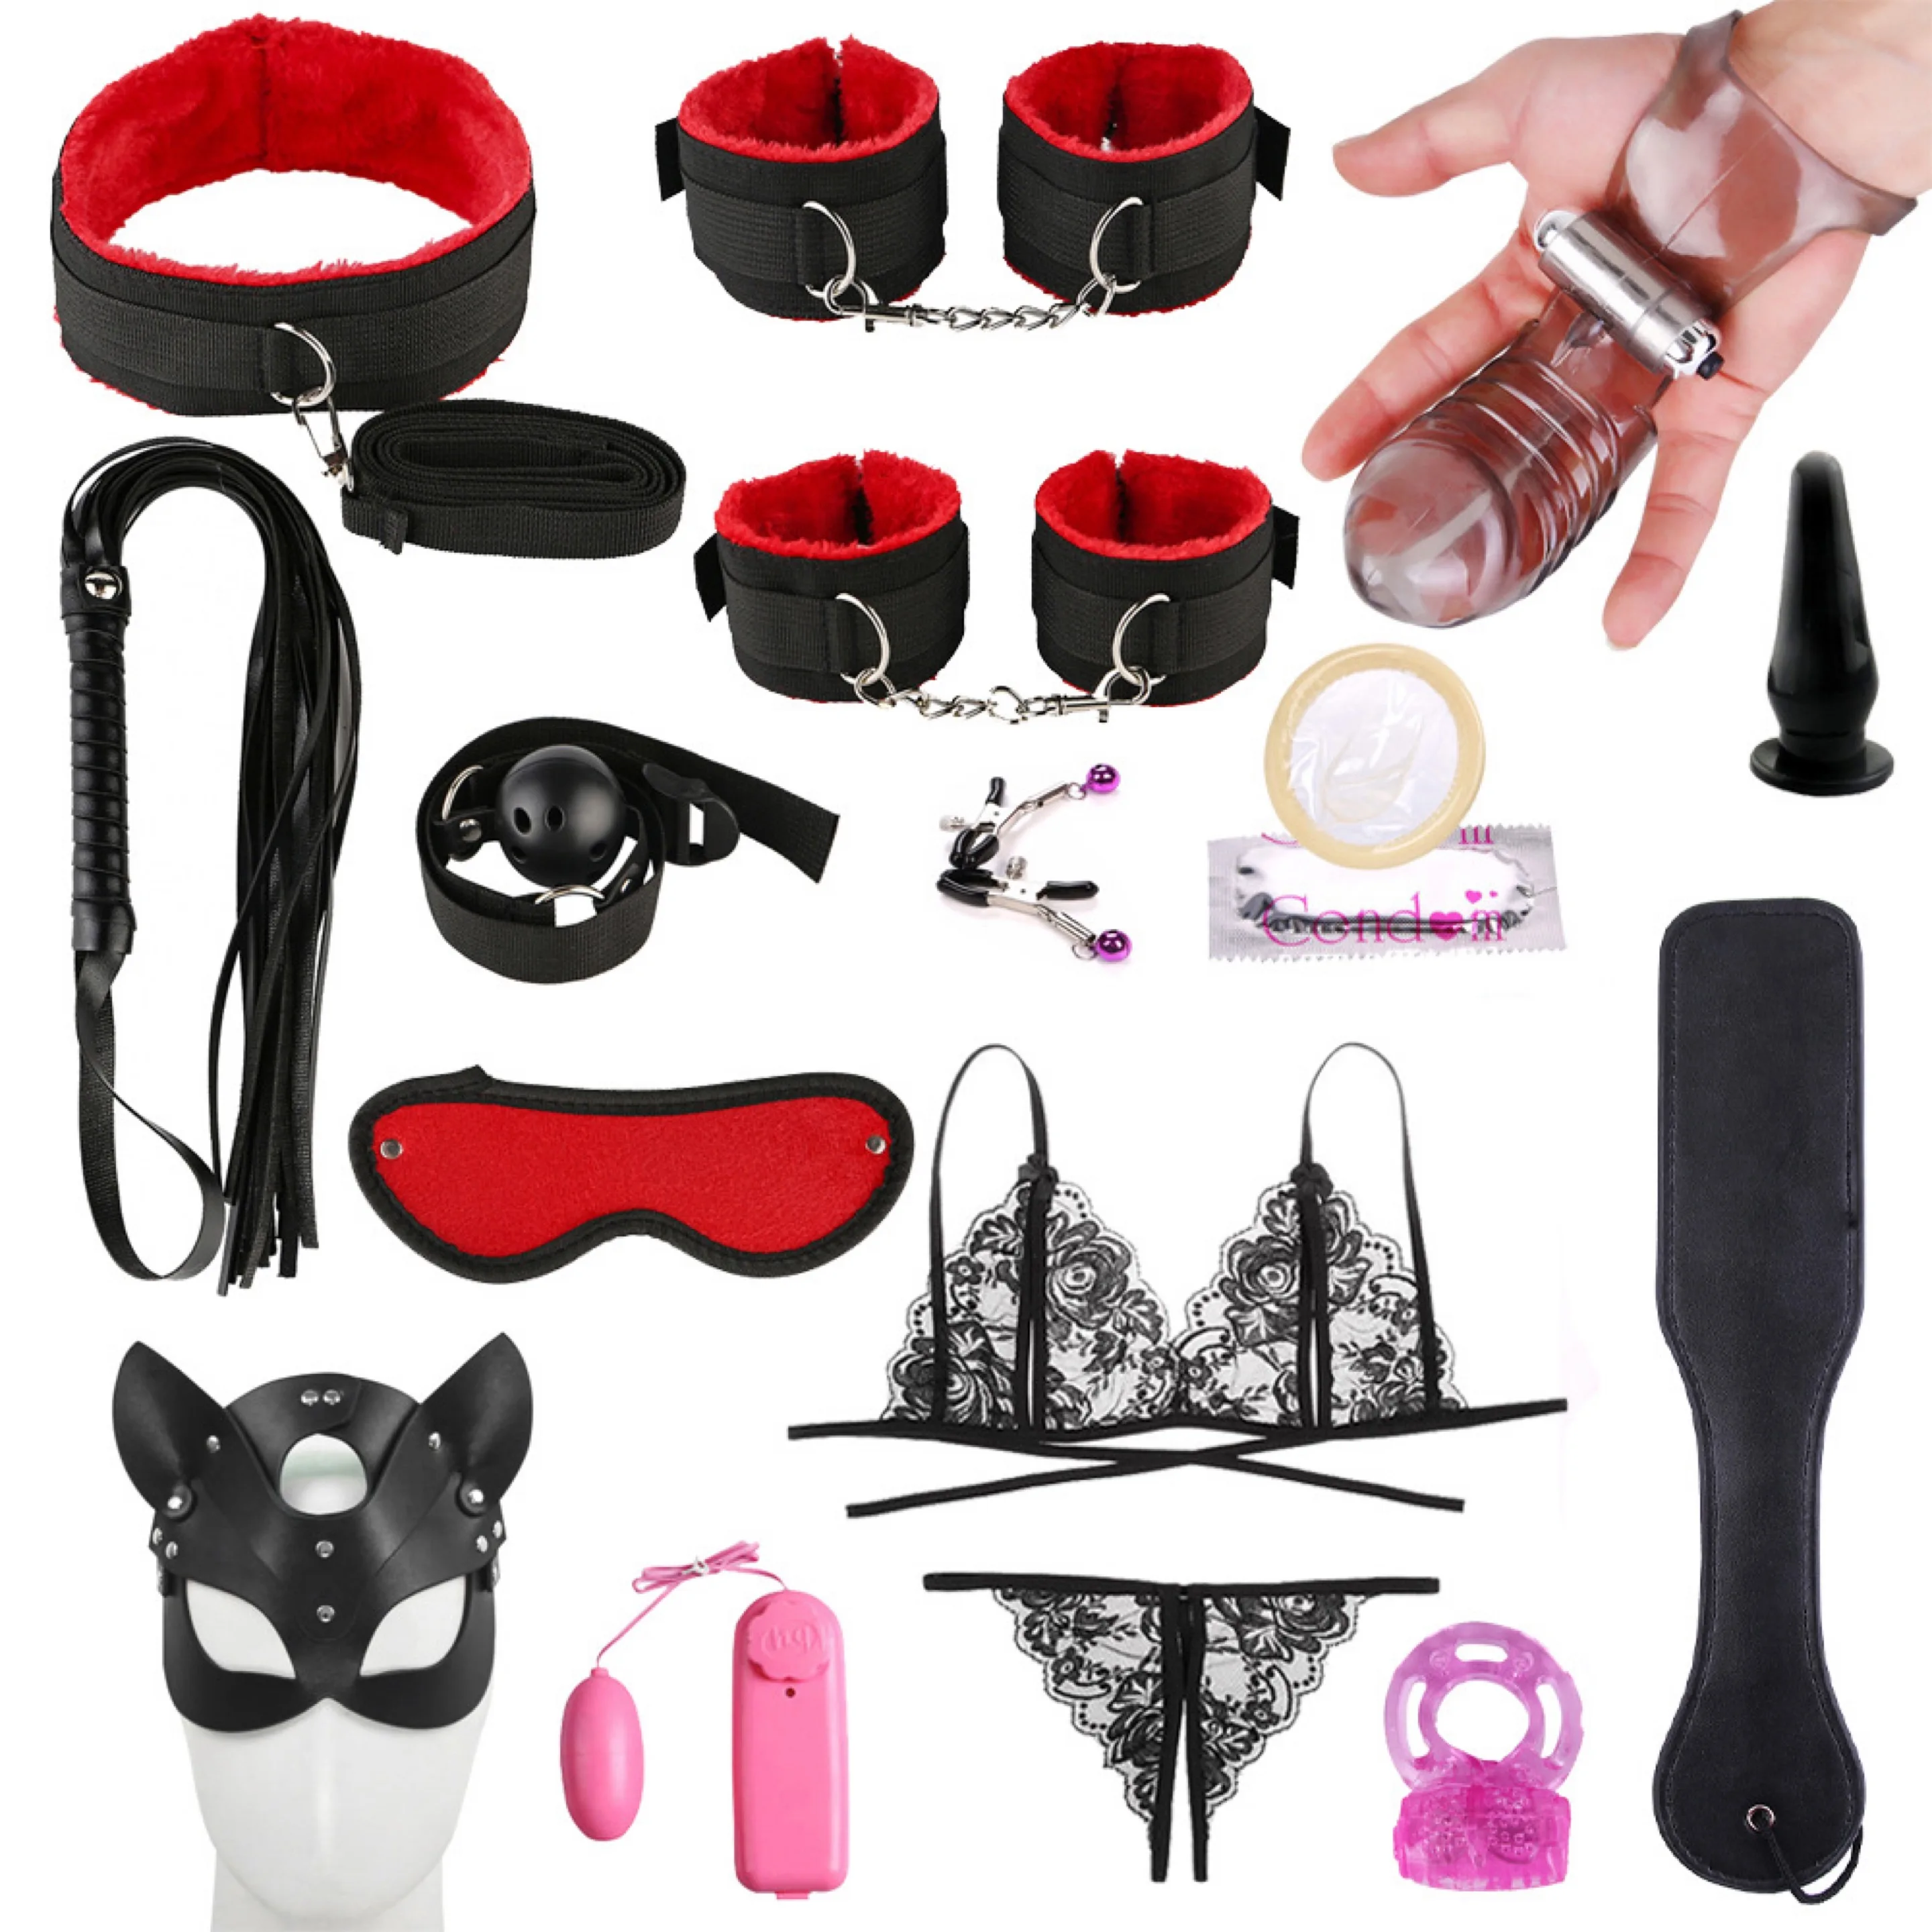 Wholesale 16pcs set Sex Toys Bondage gear sex toys for woman Handcuffs Whip anal plug husband and wife toys vibrators fetish sm Products From m.alibaba hq nude pic